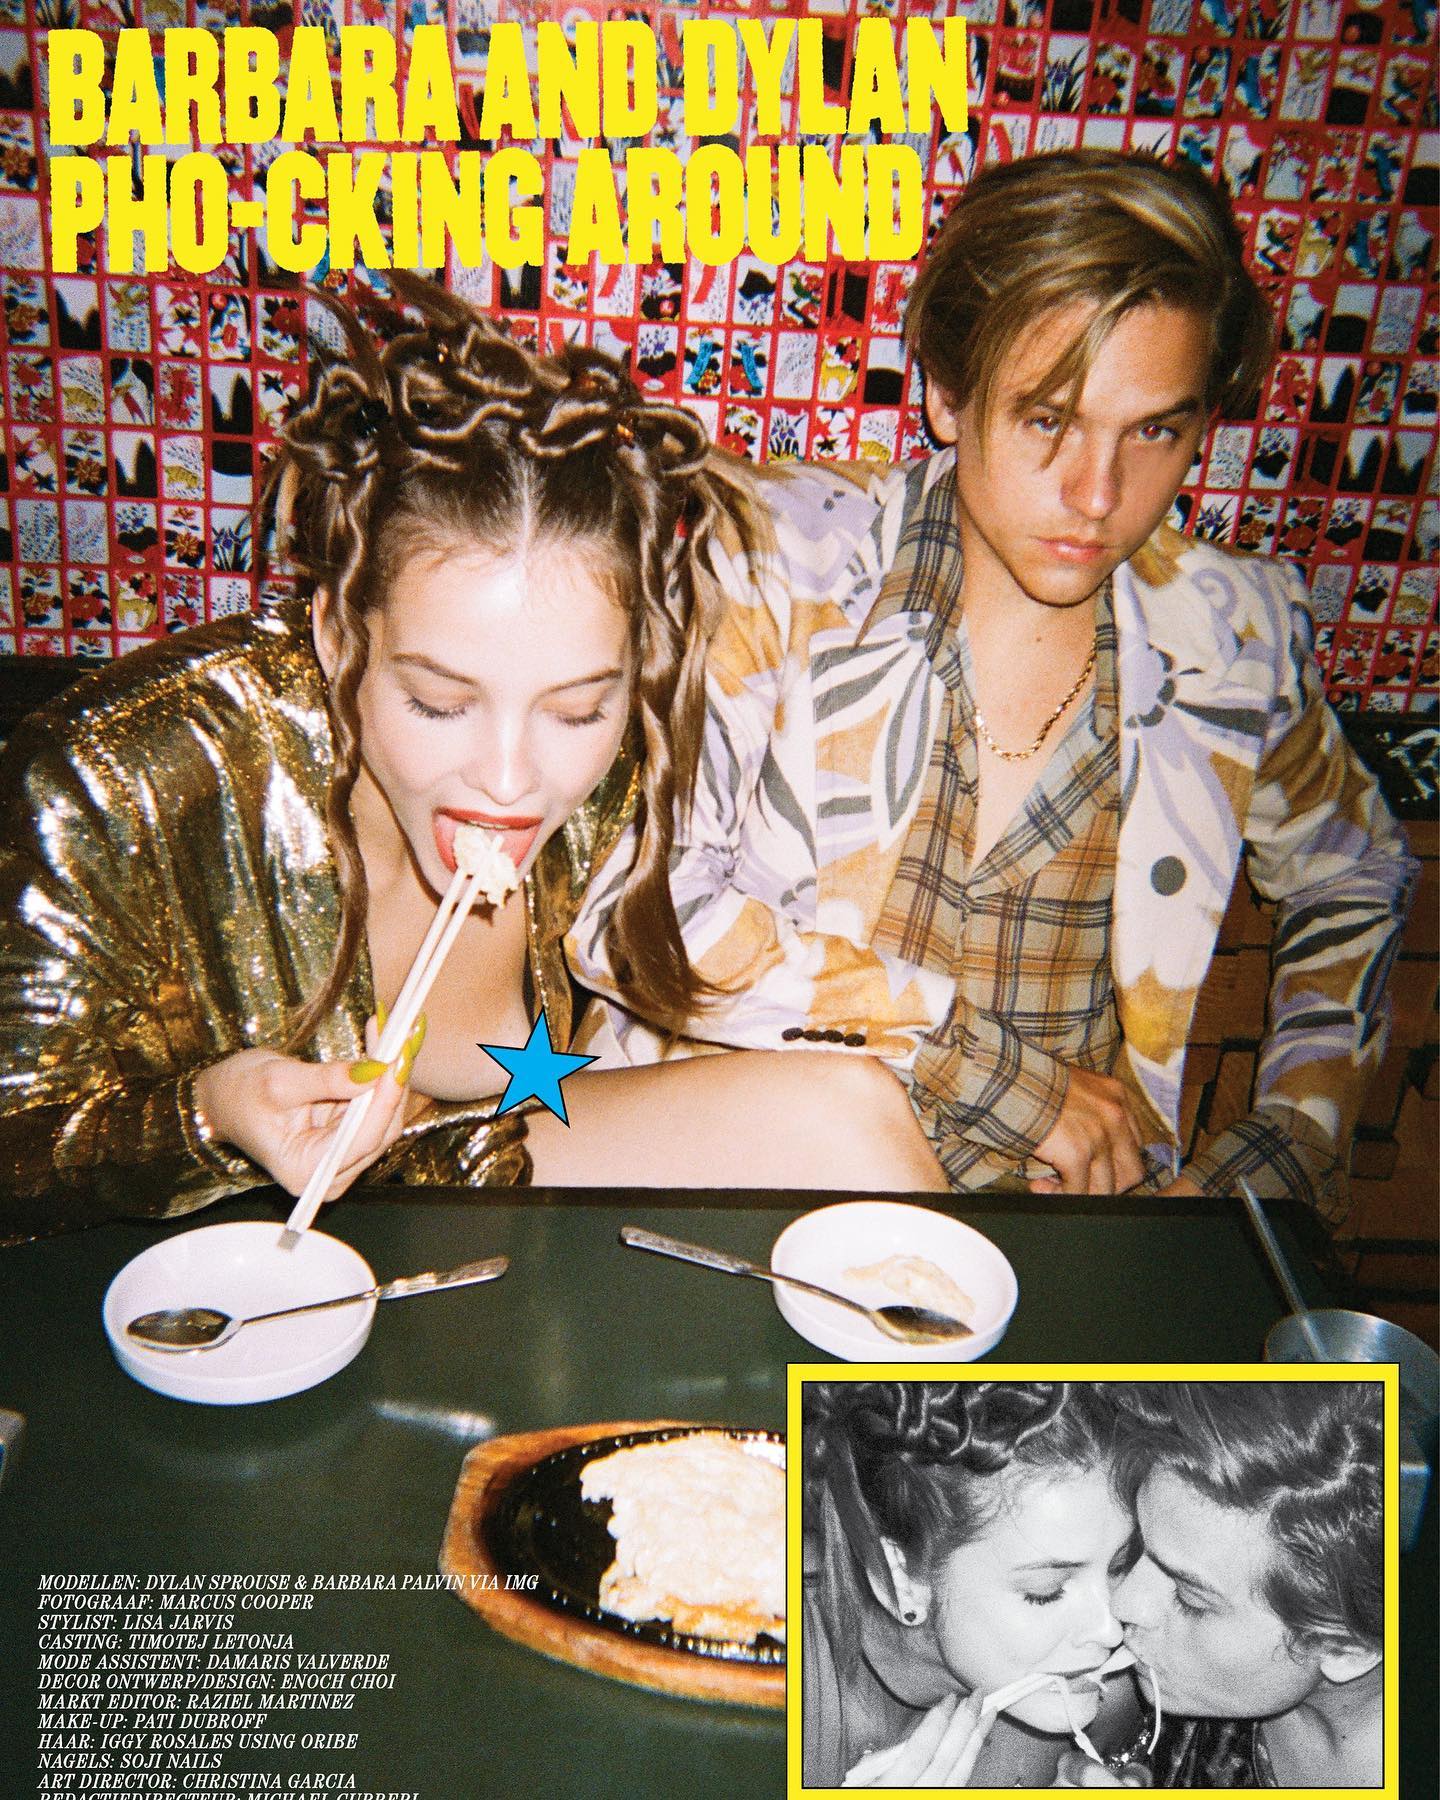 Barbara Palvin et Dylan Sprouse hit the Cover! - Photo 12